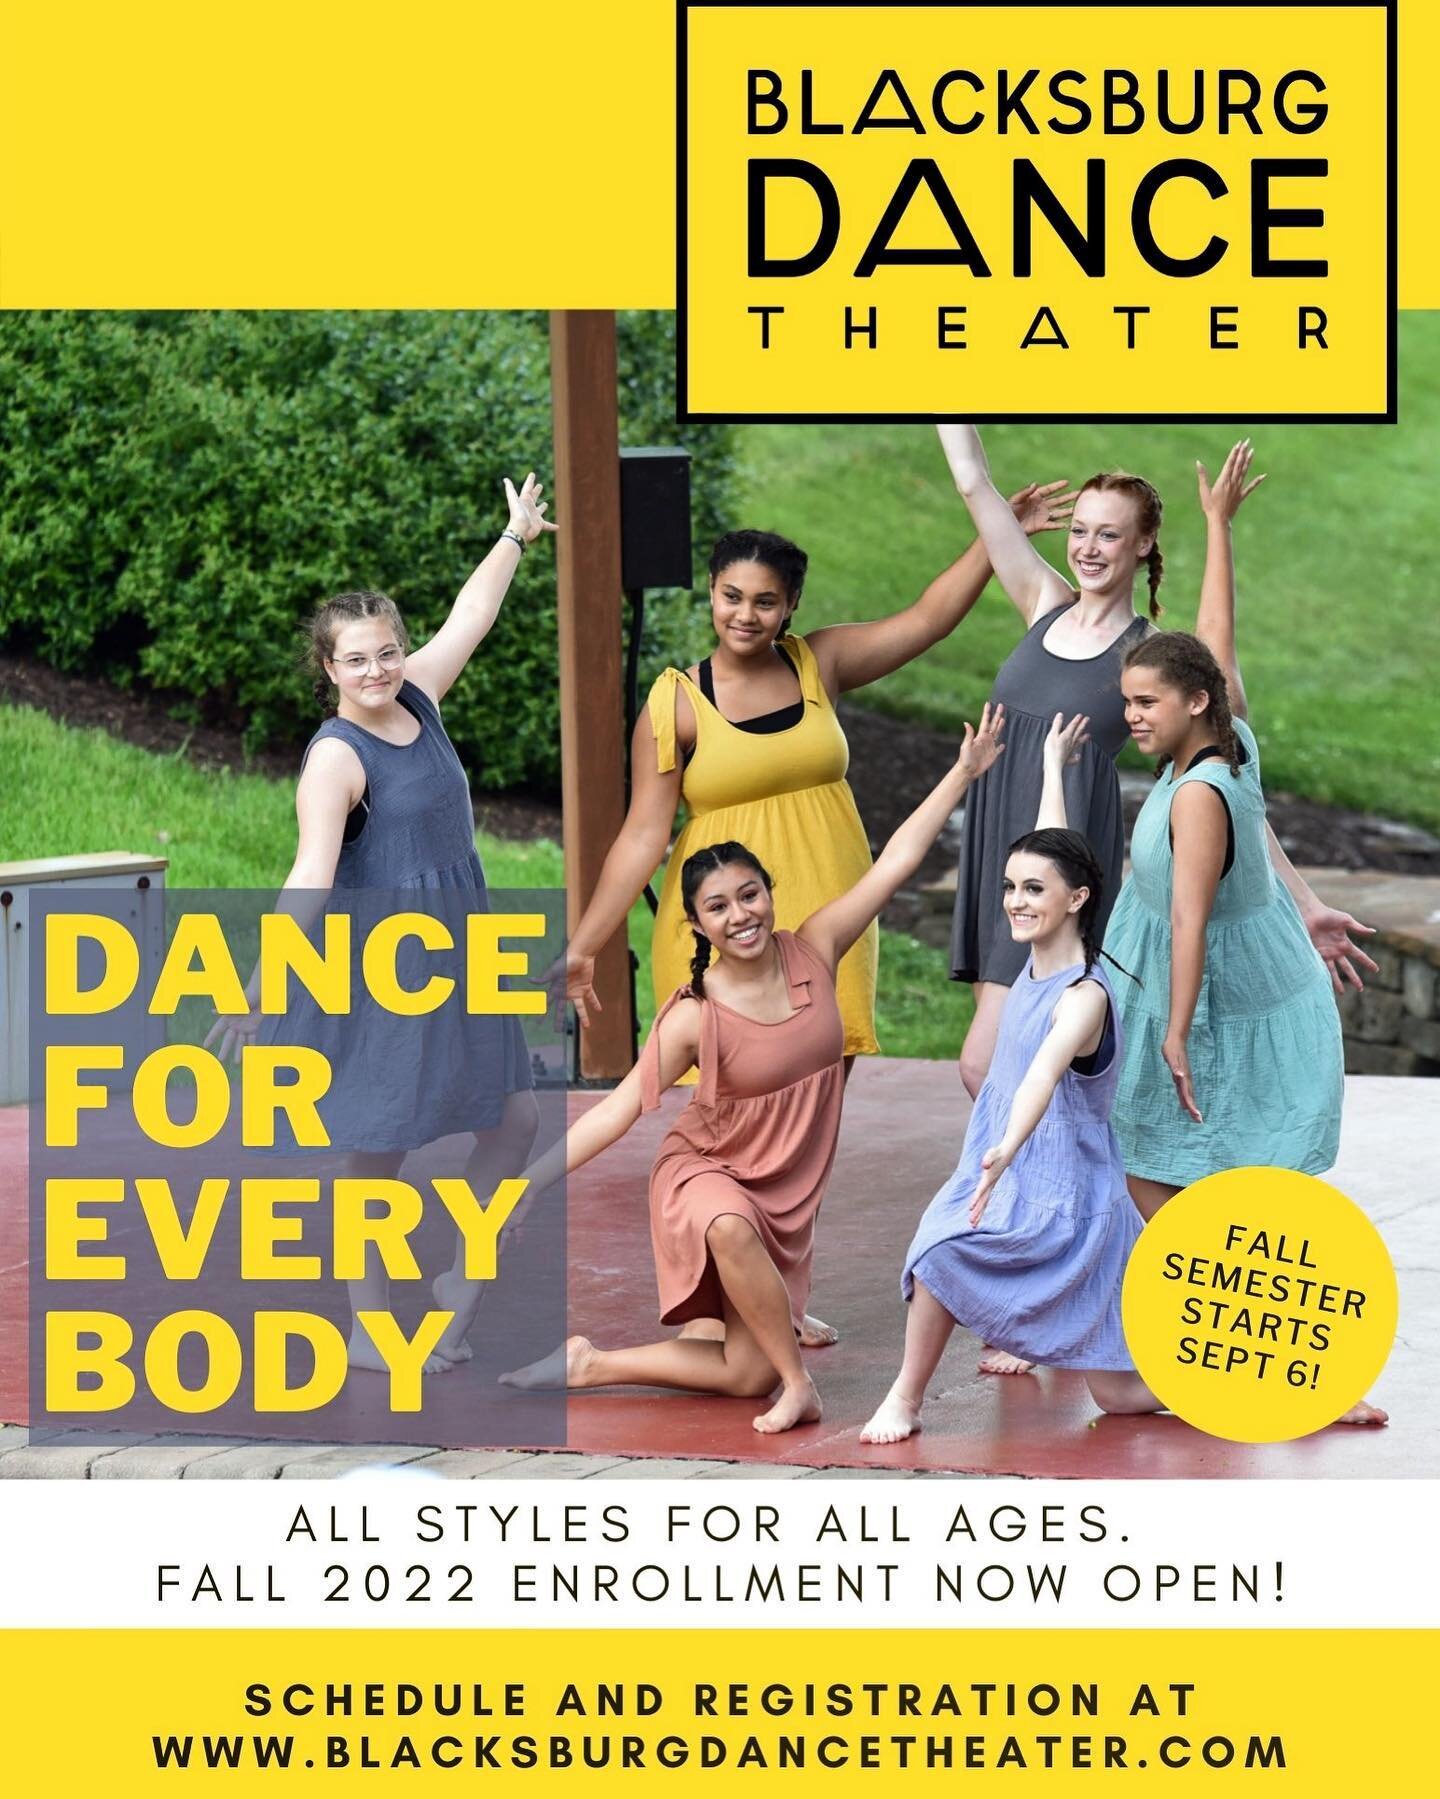 Dance👏for👏every👏body. Free trial classes THIS WEEK! Link in bio.